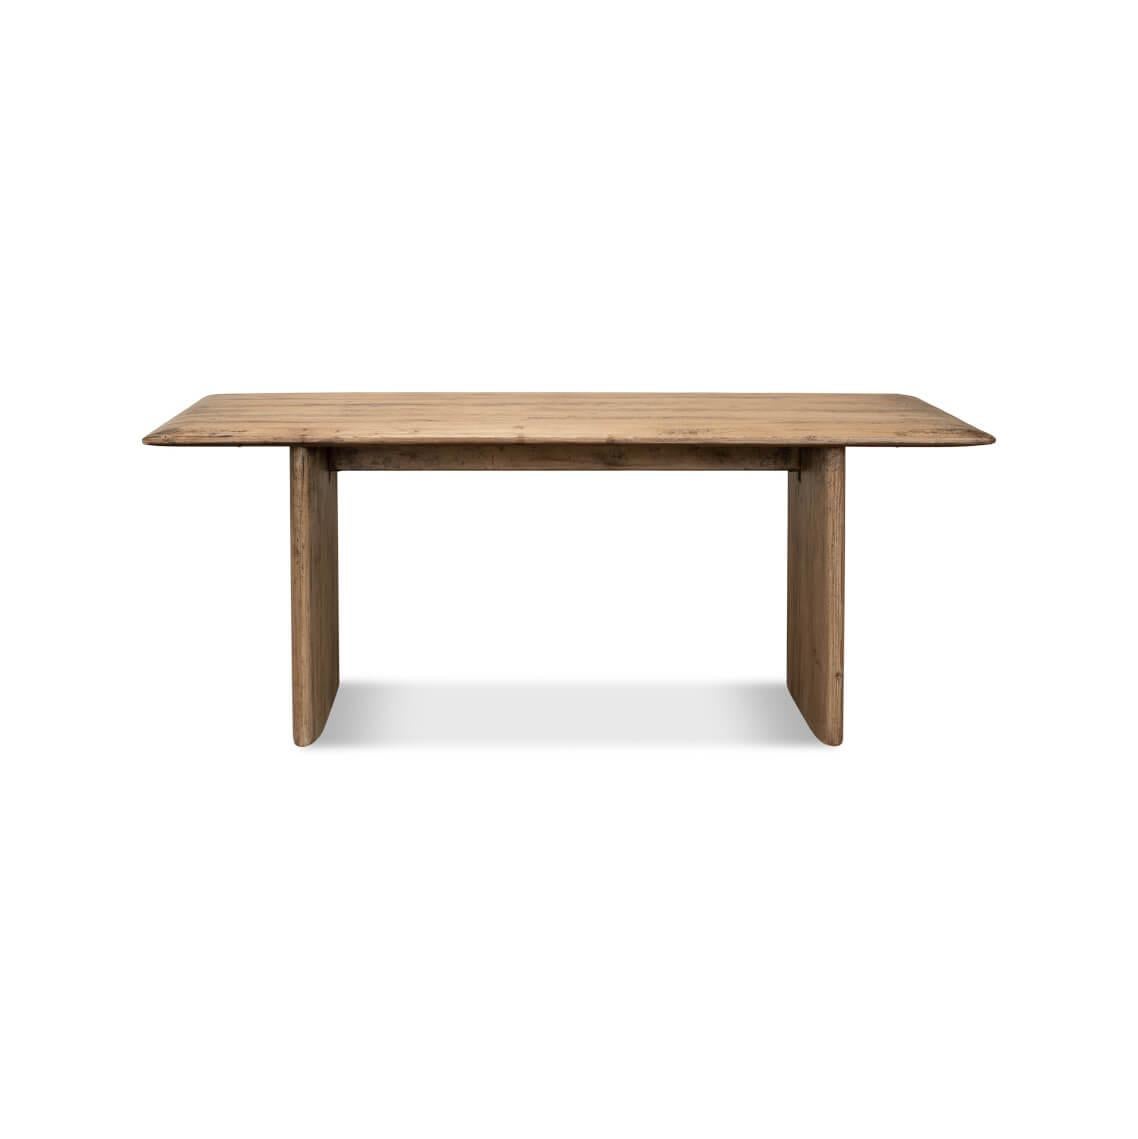 A harmonious blend of simplicity and warmth for your dining space. This table features a natural wood surface of reclaimed pine with a rich grain that tells its unique story. Its minimalist silhouette, characterized by clean lines and a thick,